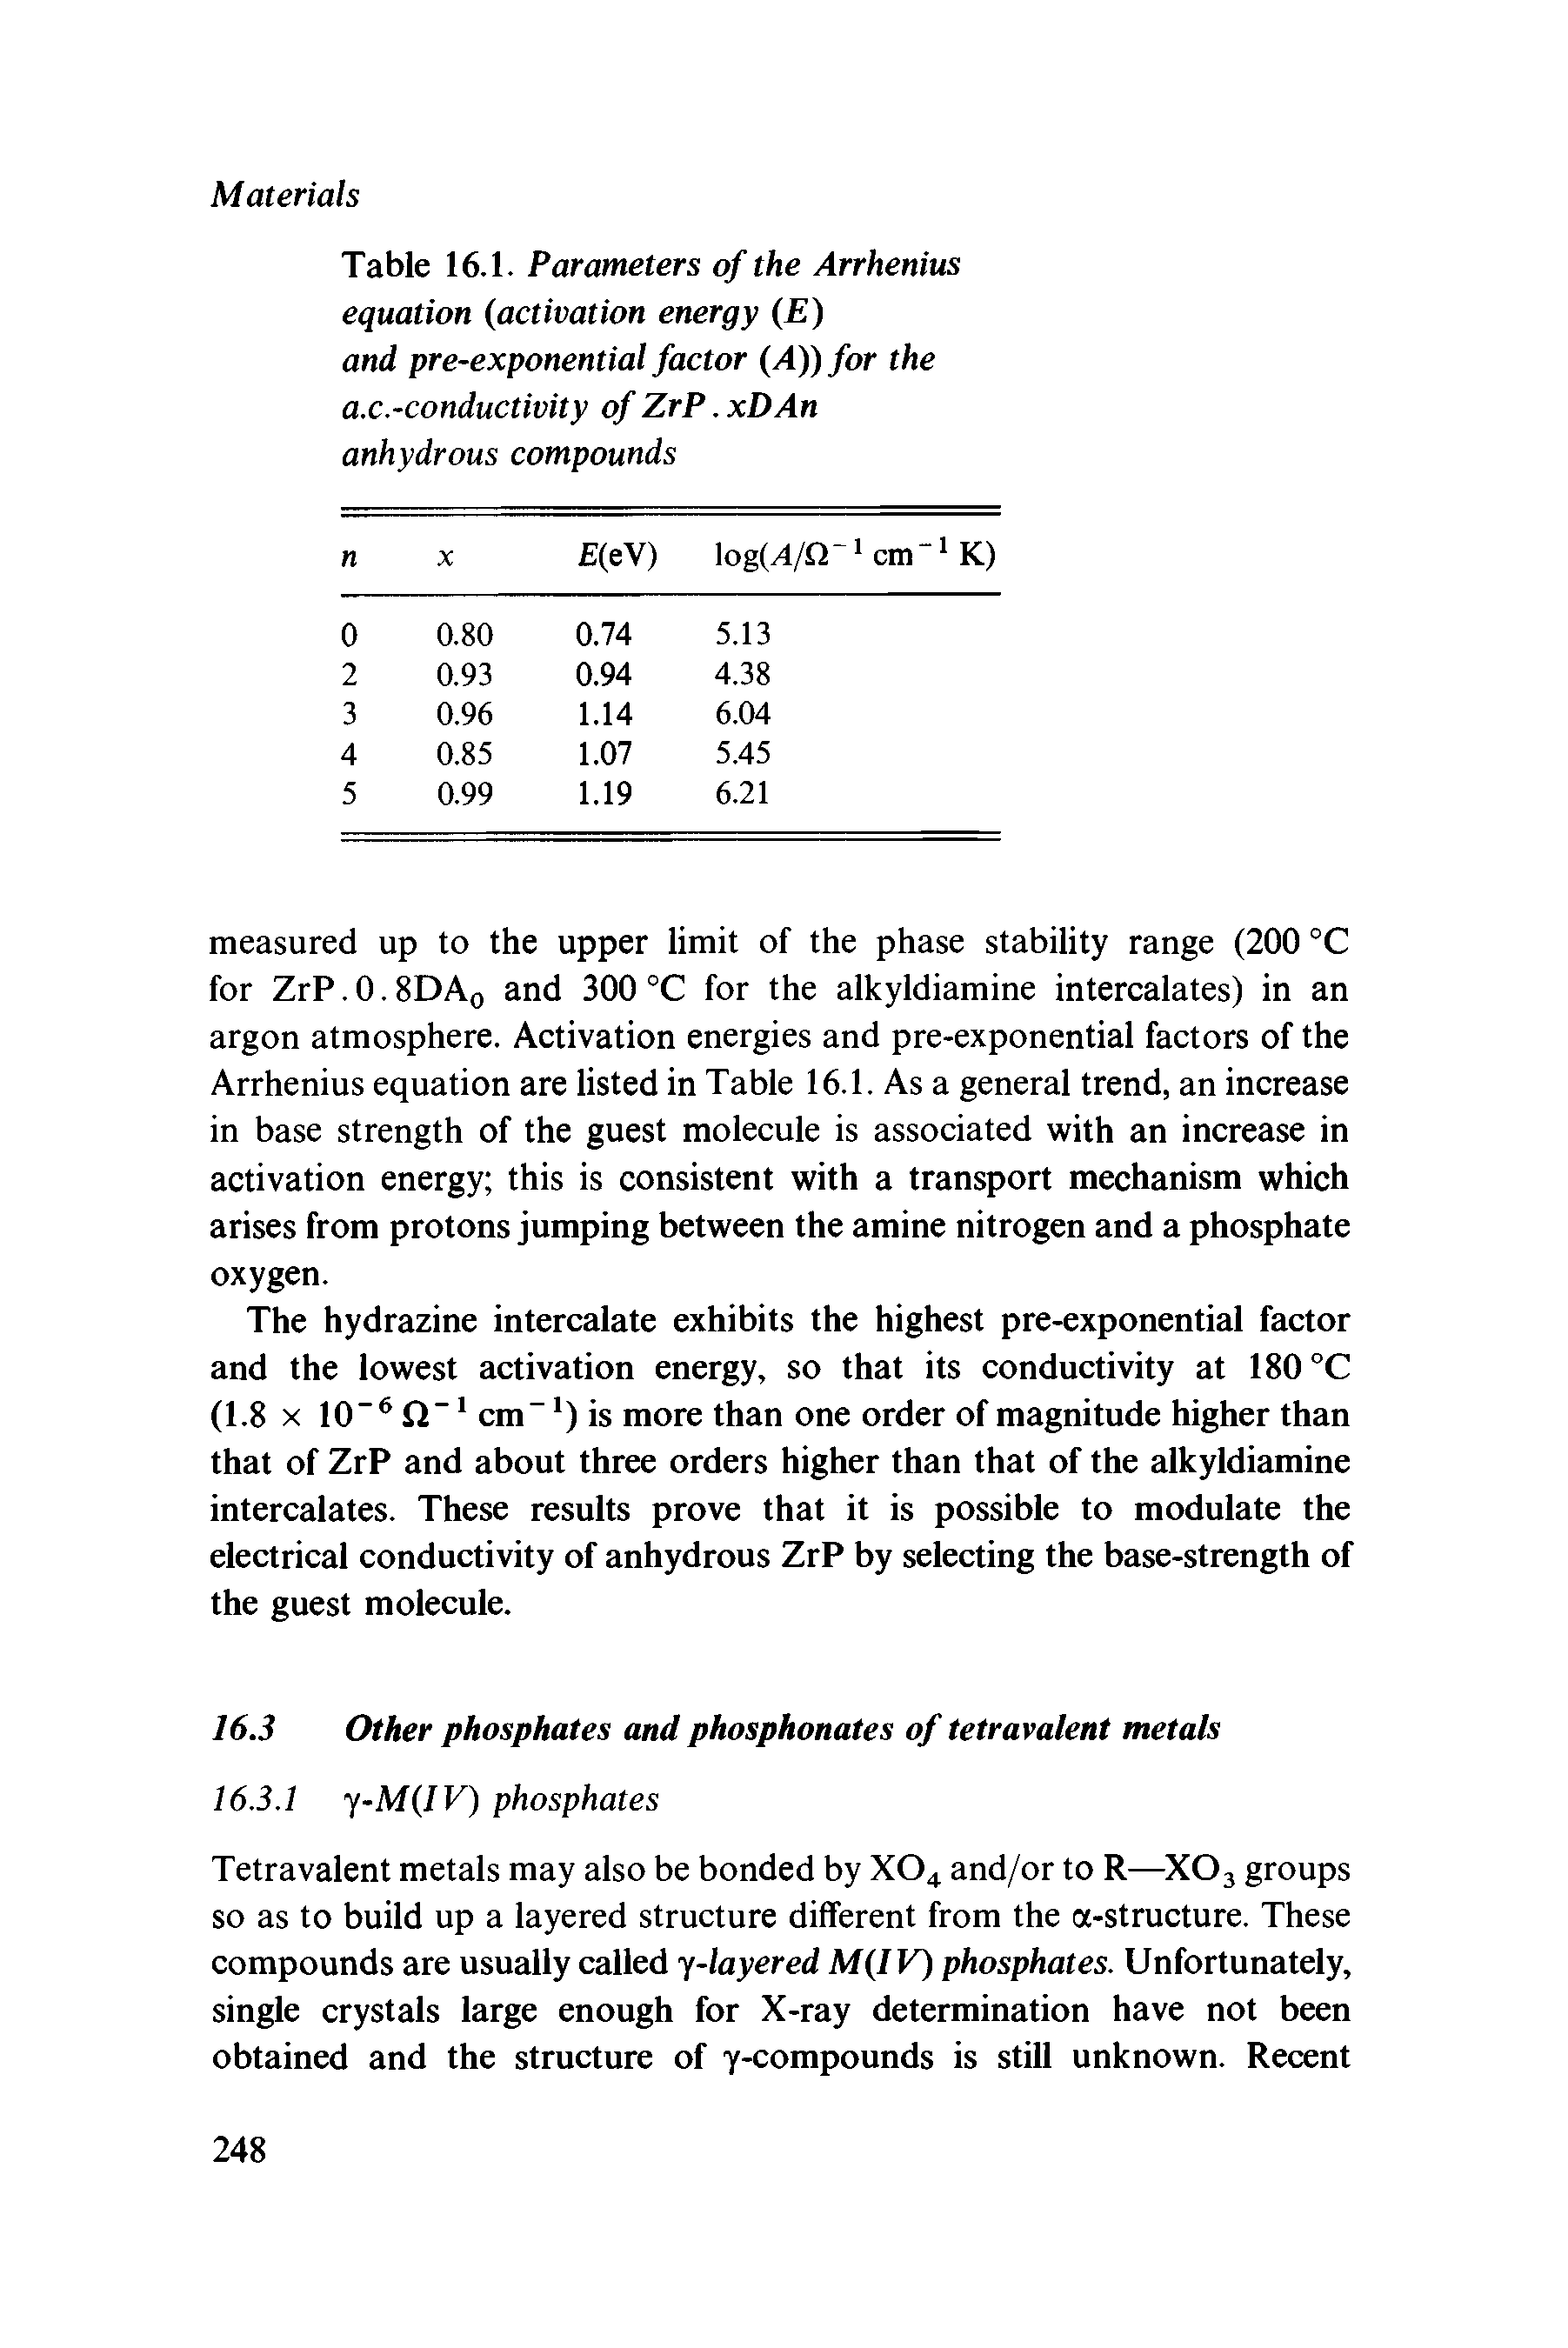 Table 16.1. Parameters of the Arrhenius equation (activation energy (E) and pre-exponential factor (/4)) for the a.c.-conductivity of ZrP. xDAn anhydrous compounds...